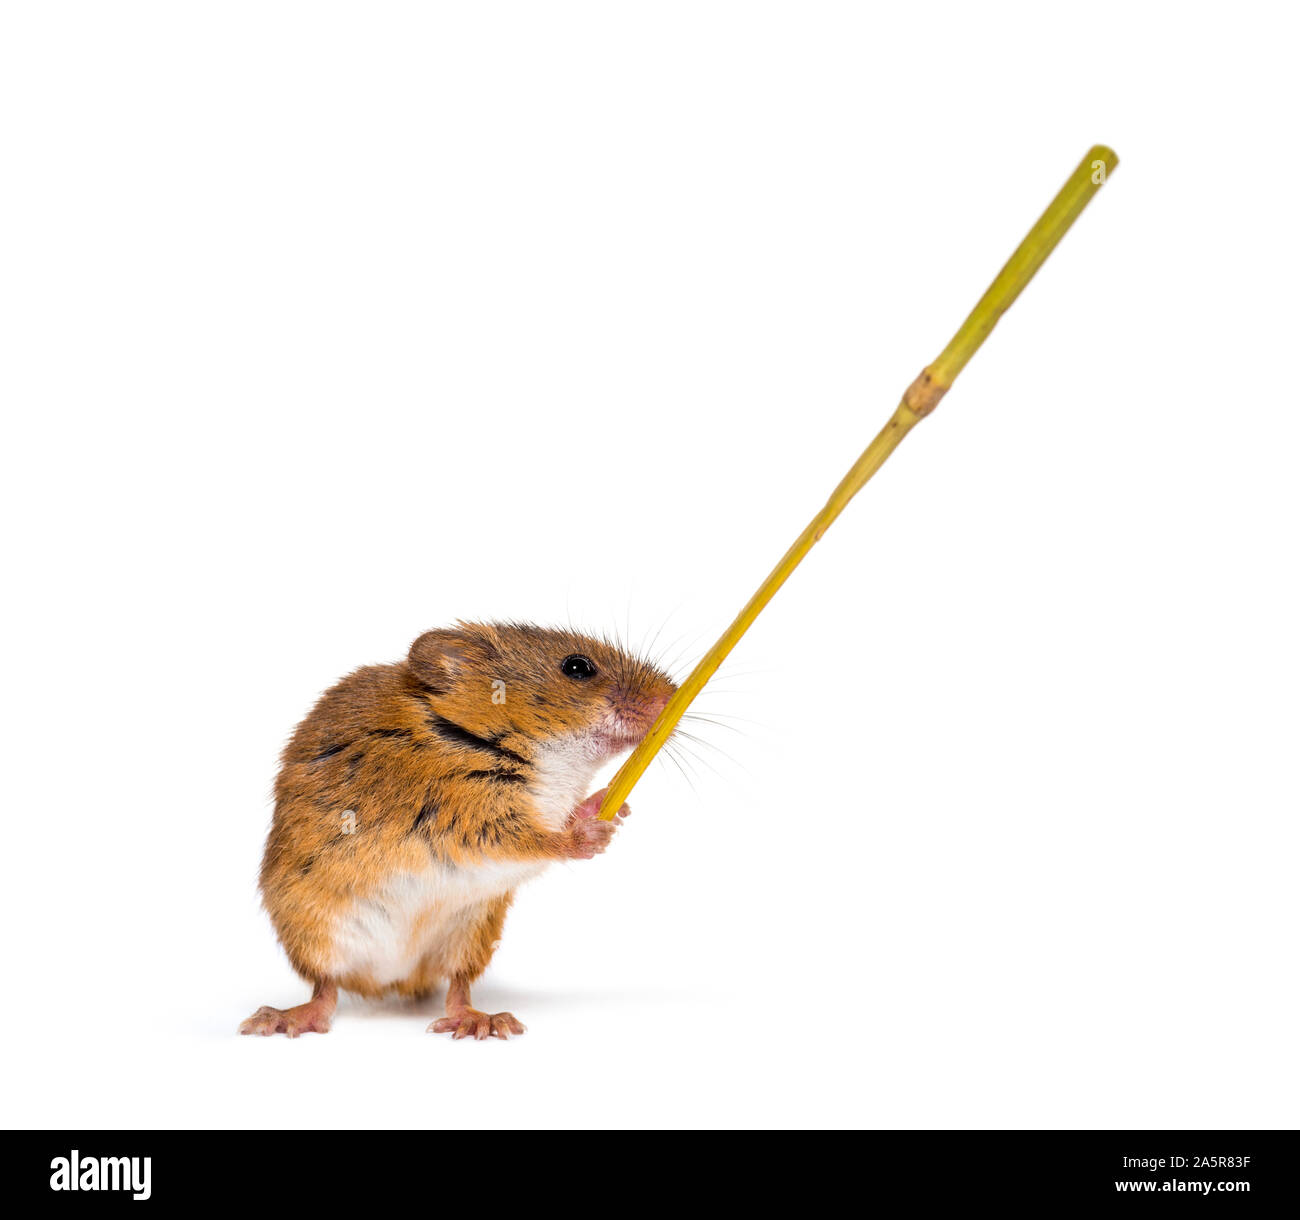 Eurasian harvest mouse, Micromys minutus, holding twig in front of white background Stock Photo